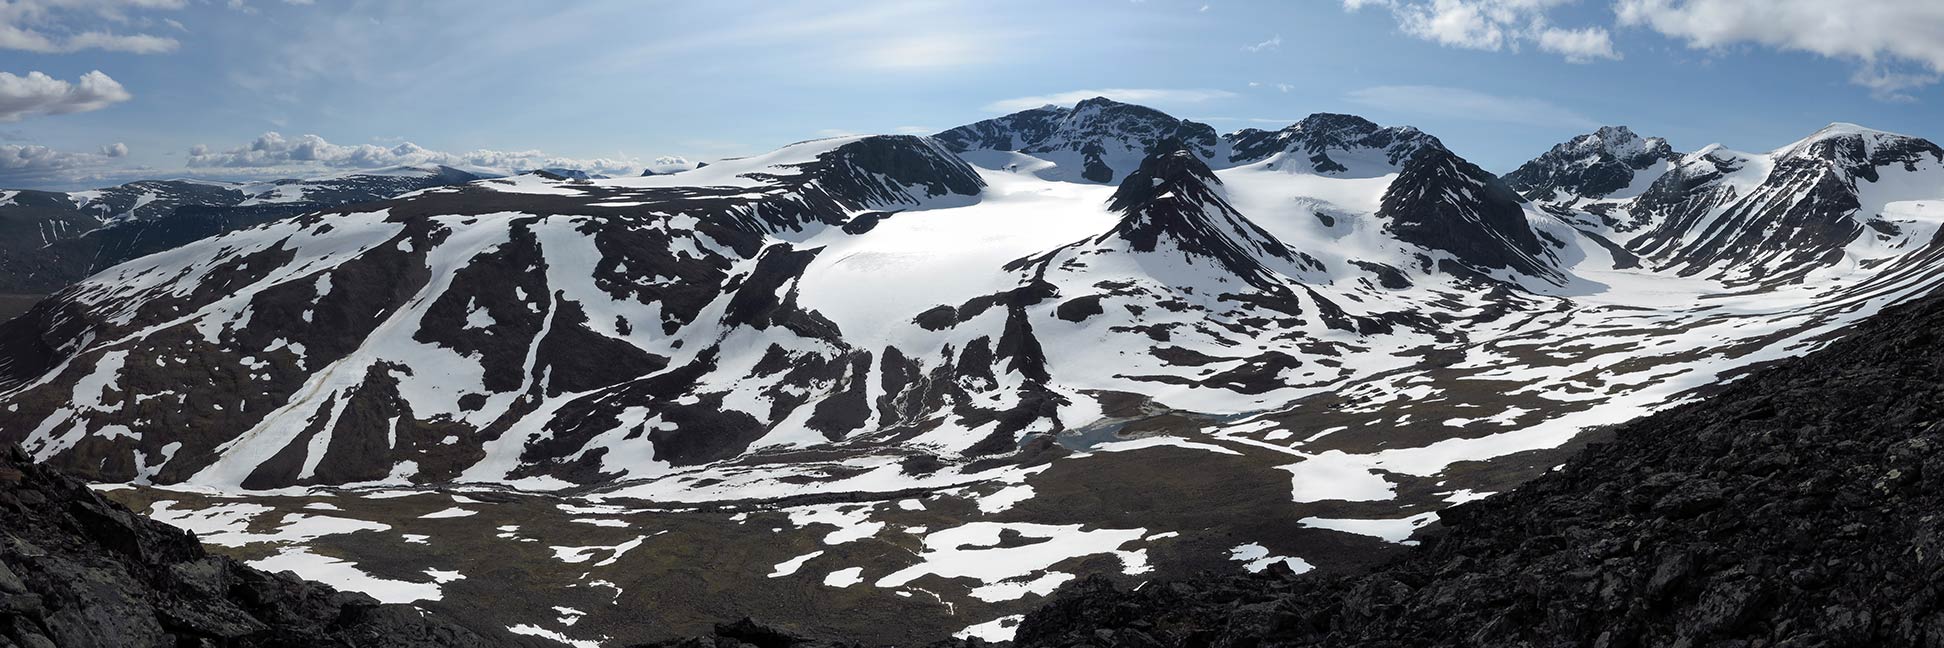 Panorama of the Tarfala valley with Kebnekaise, Sweden's highest mountain.